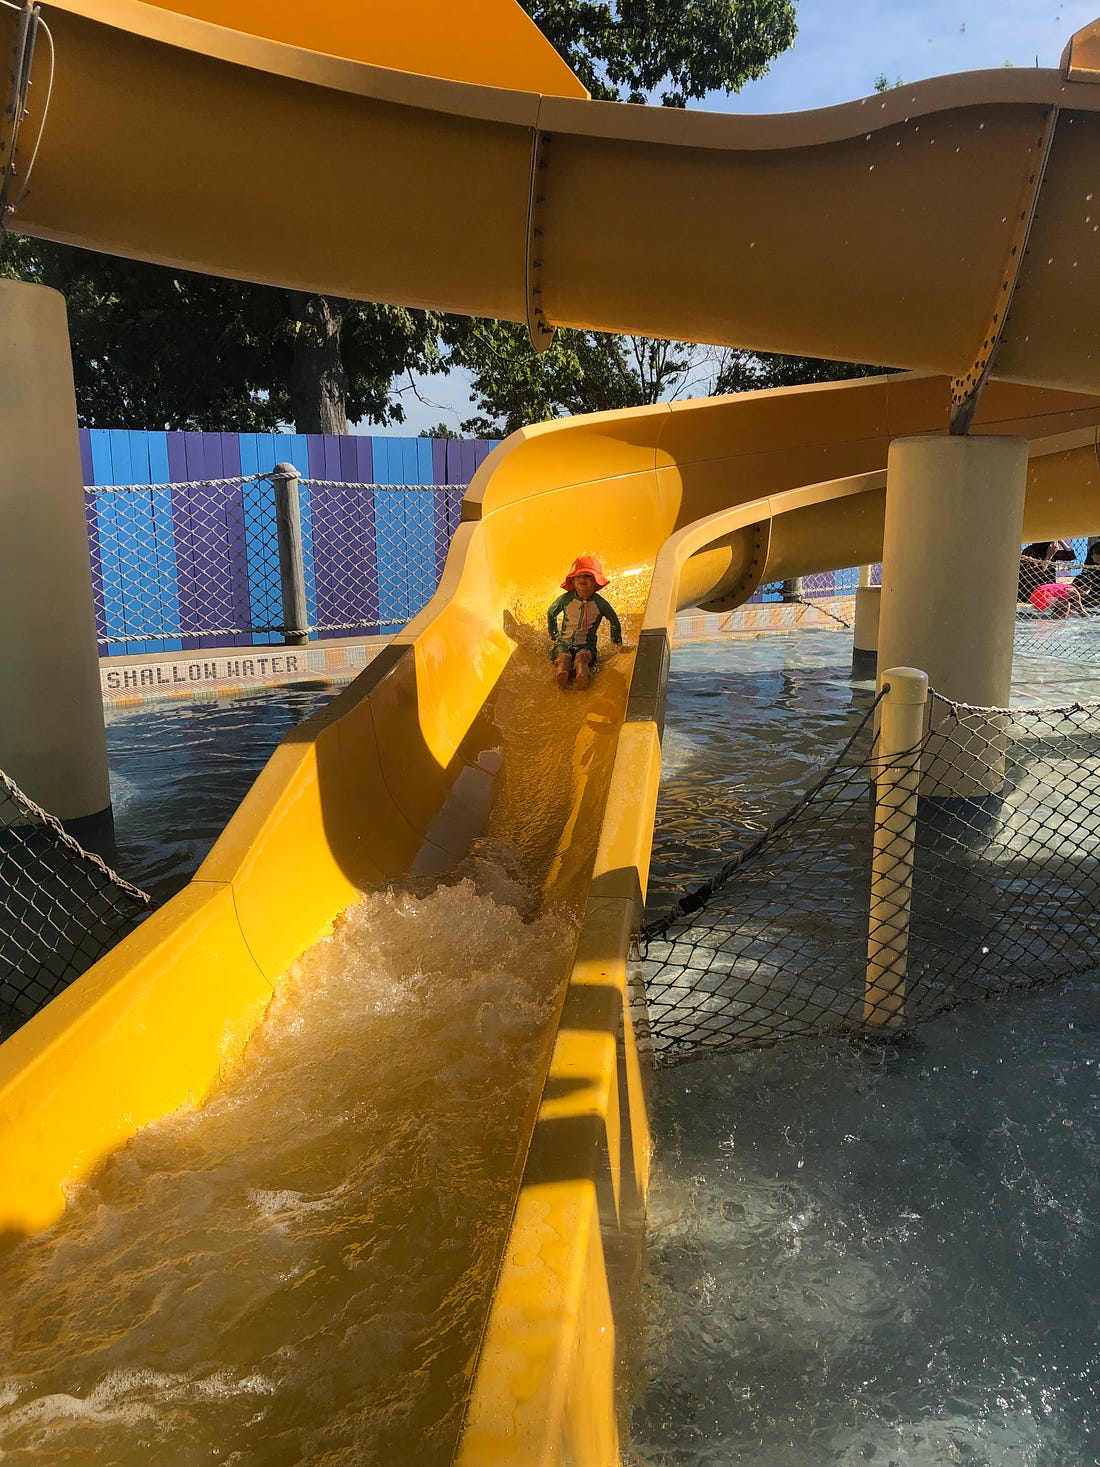 Photo shows a 4 year old in an orange hat on a winding yellow water slide.